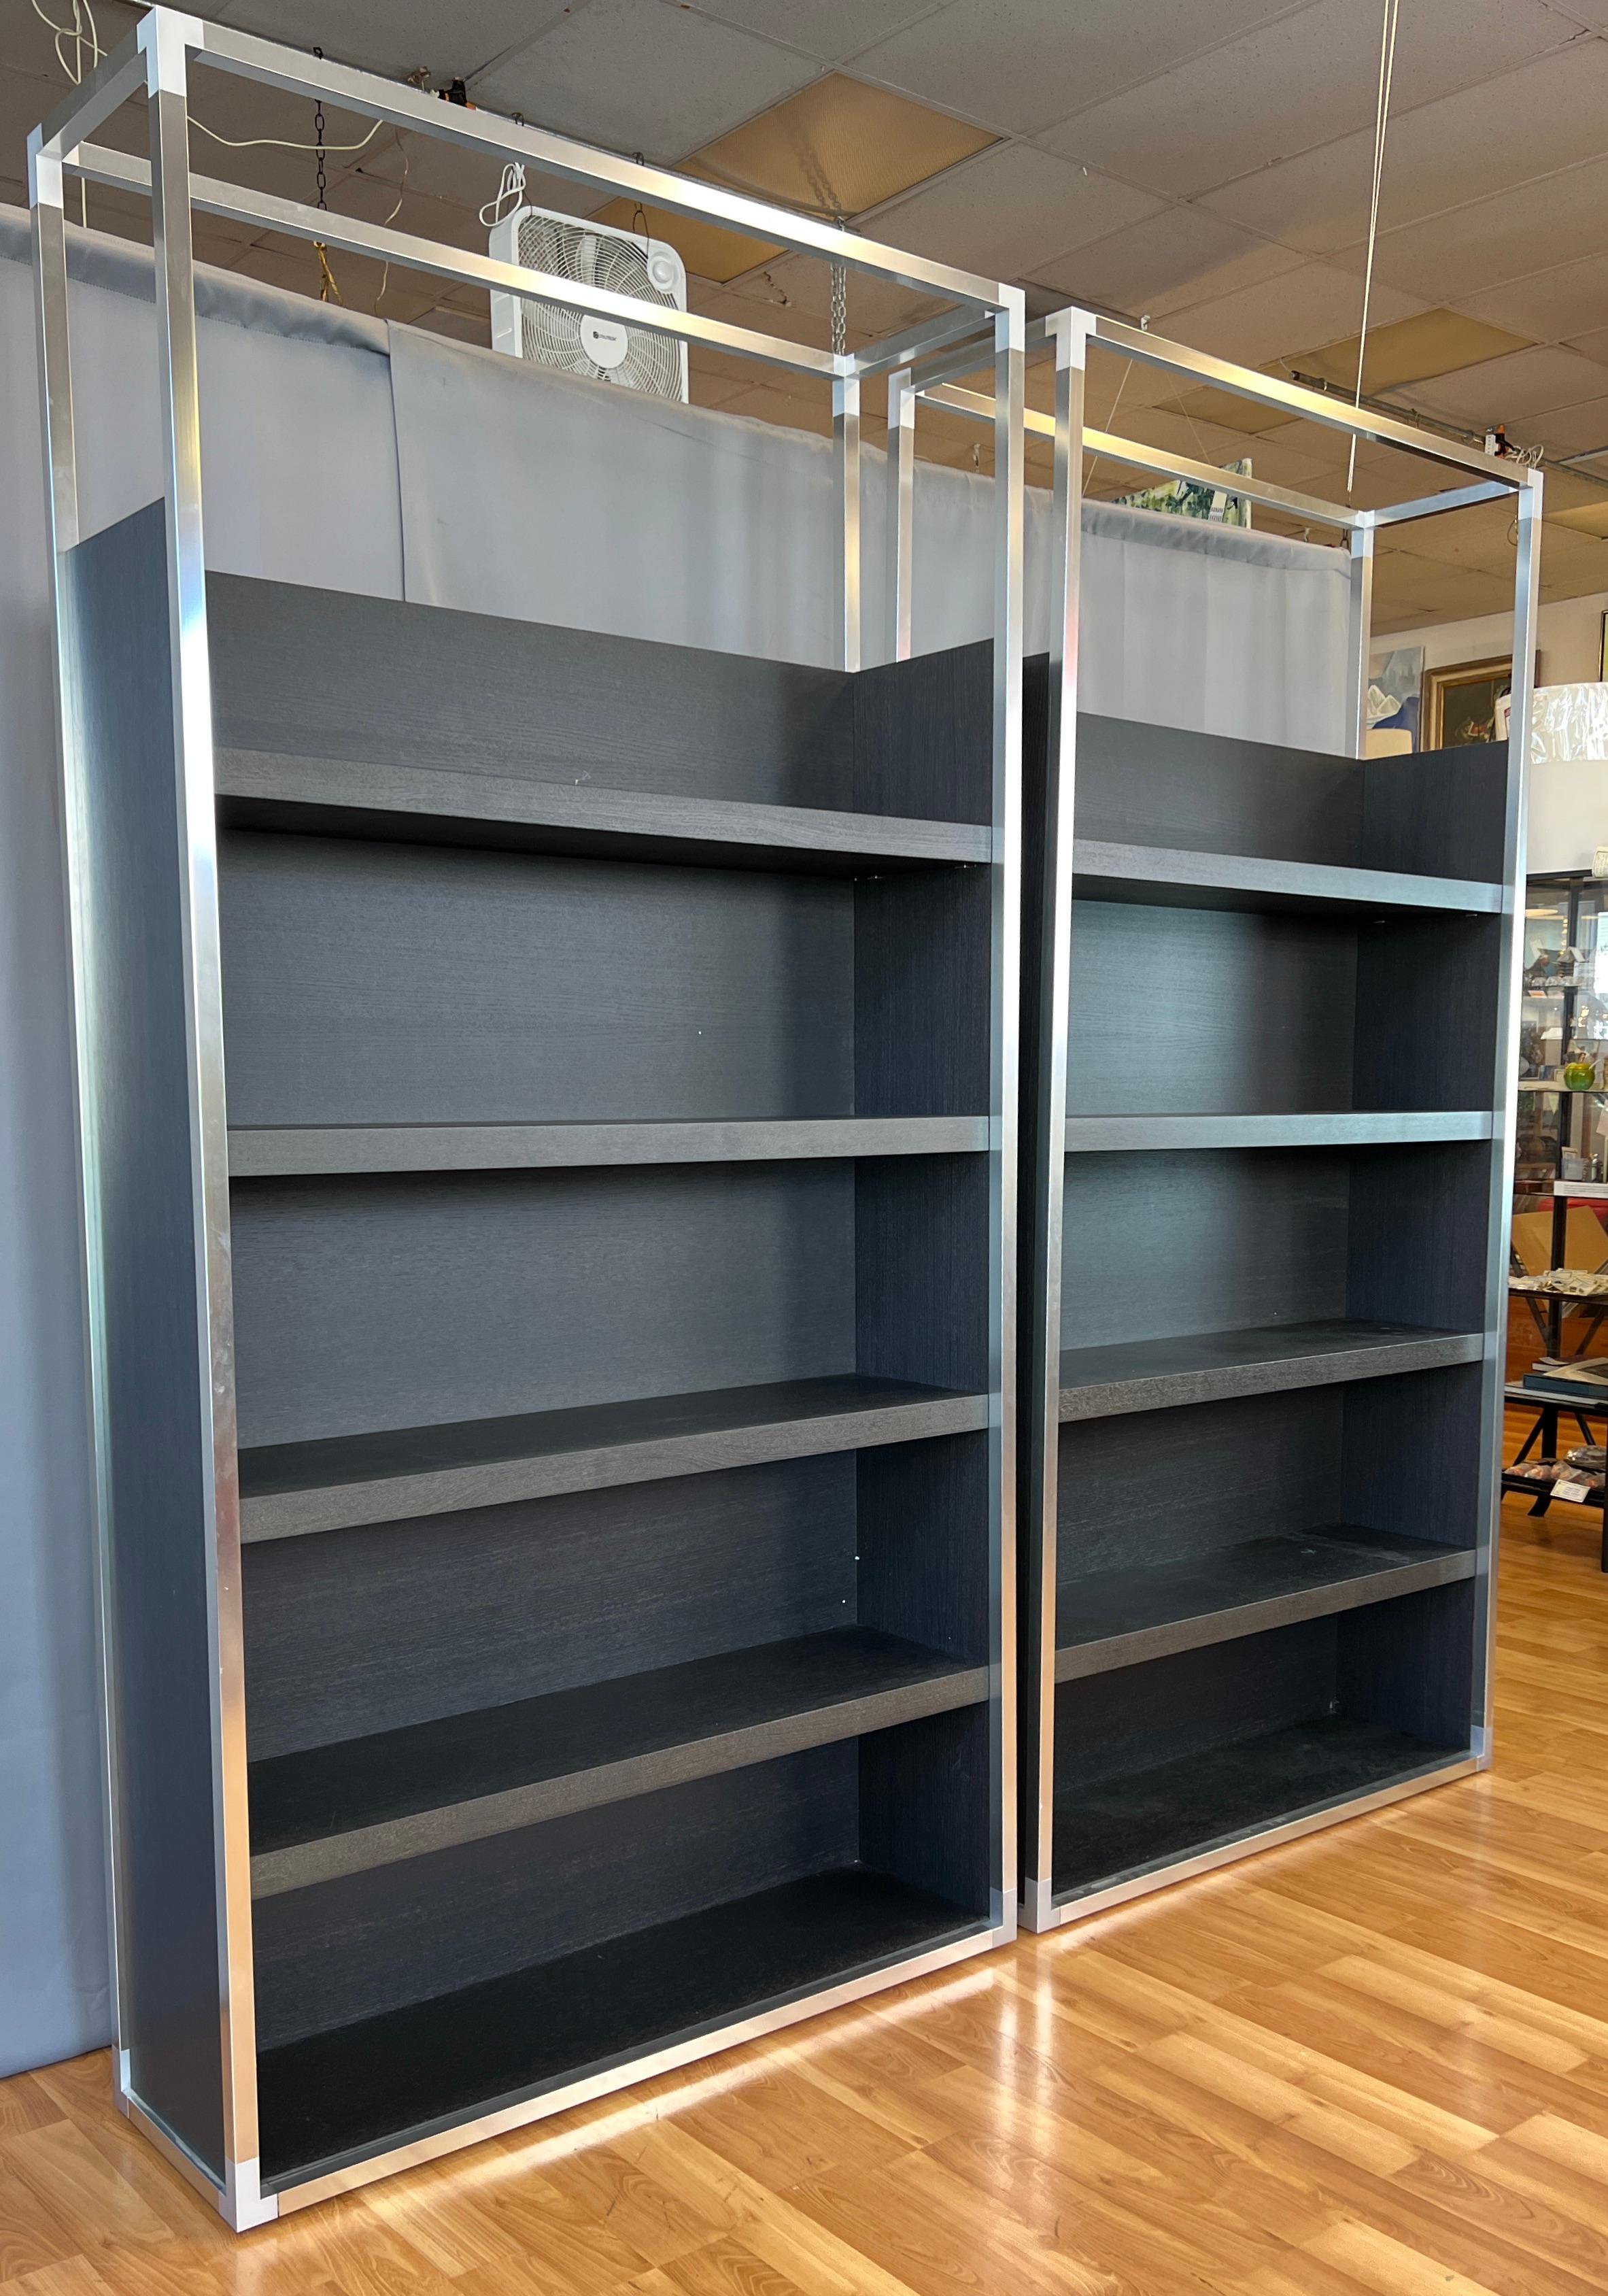 Offered here are two Dedicato Bookcases Designed By Didier Gomez for Ligne Roset.

Each unit looks to be an Ebony Oak, five shelves each starting with the bottom, which are not adjustable.
Top open niche will allow you to display tall art glass,